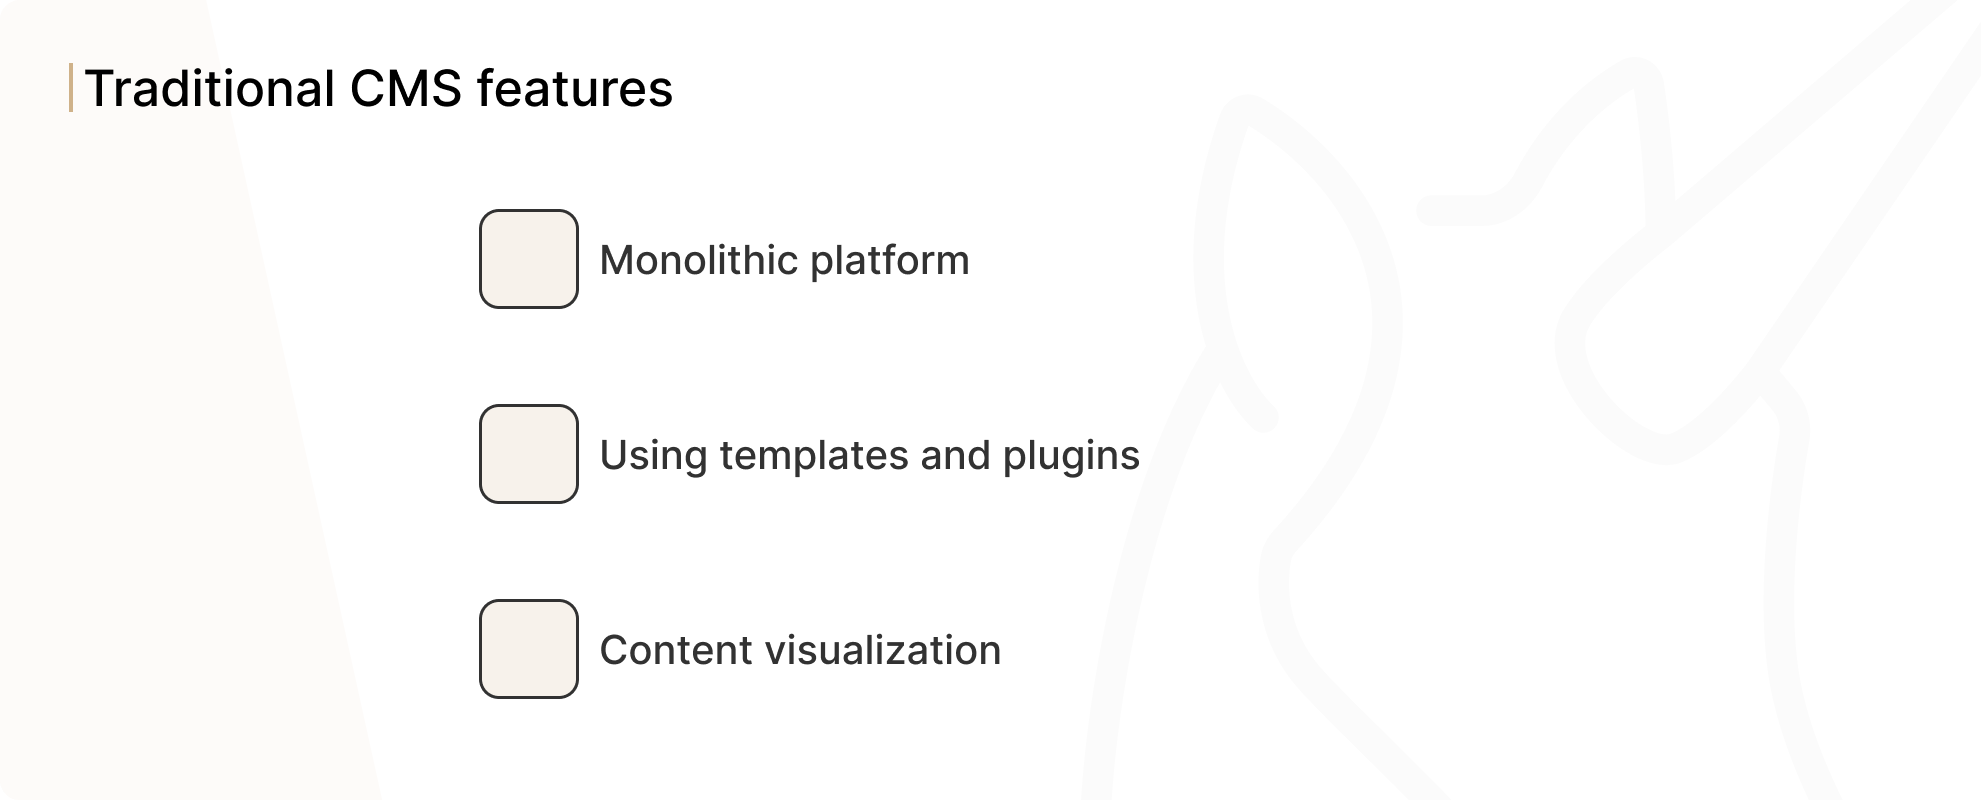 Traditional CMS features